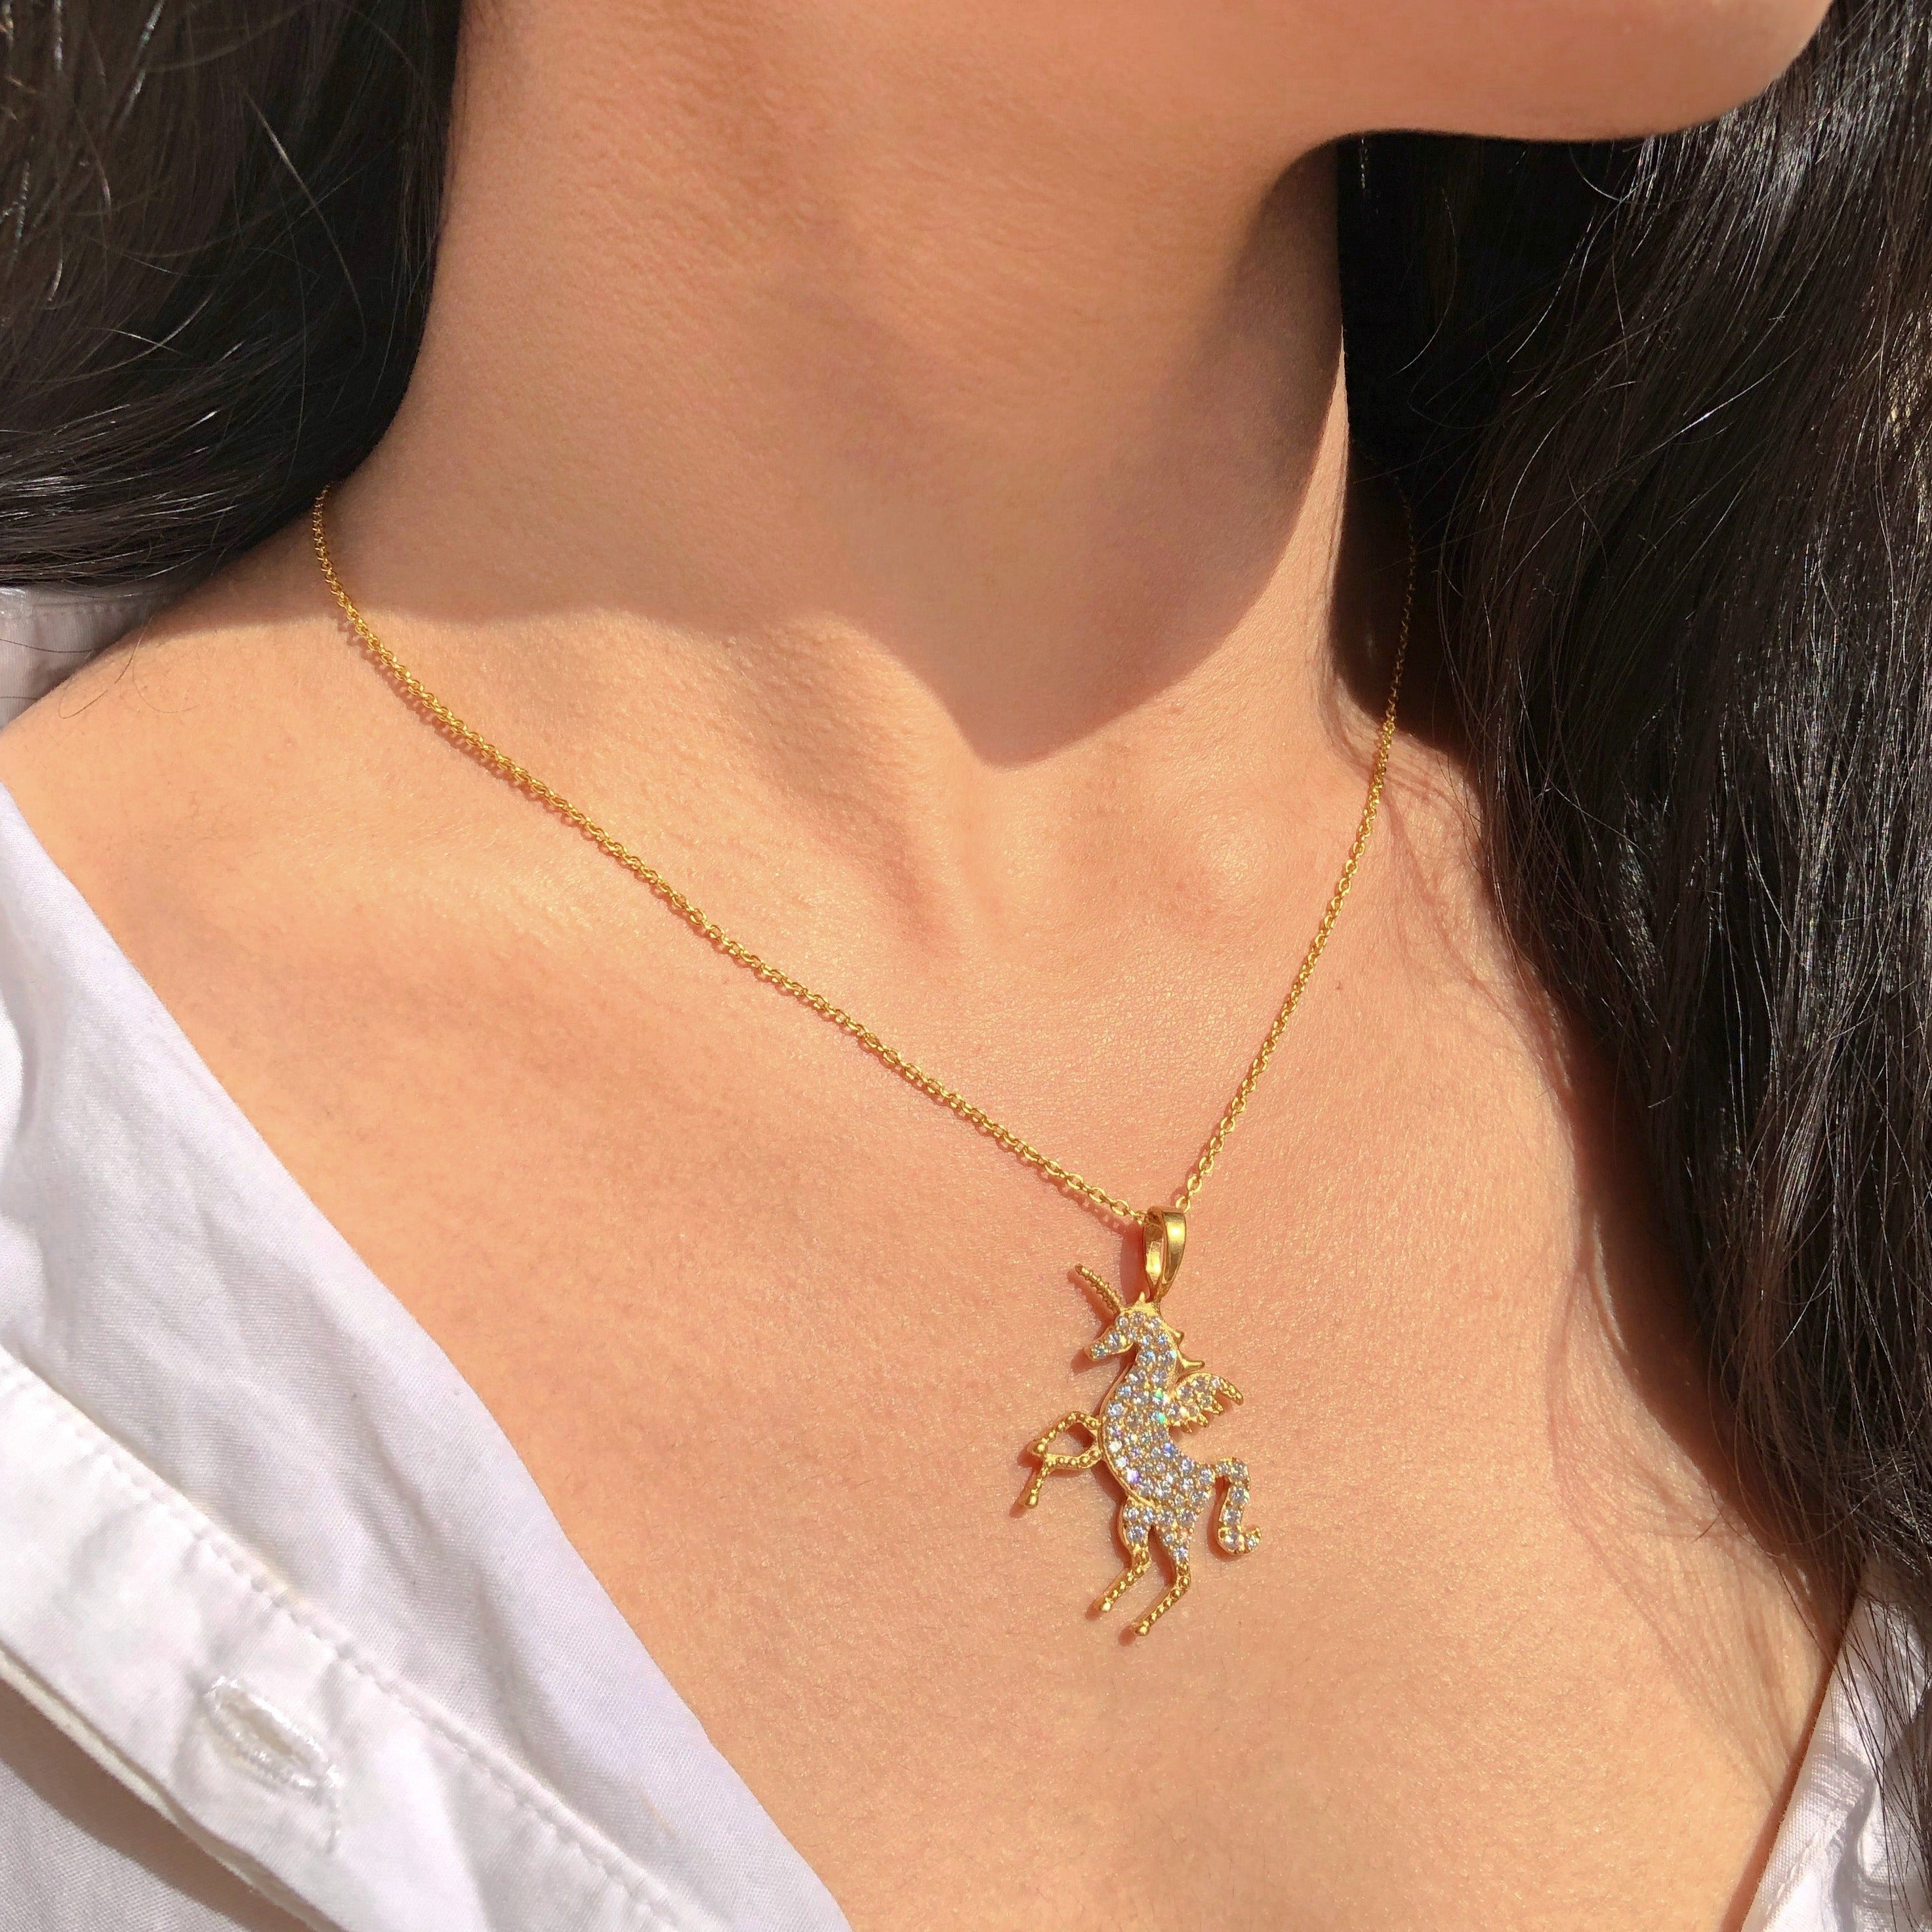 Handmade Unicorn Pendant Cute Unicorn Necklace Gold Chains Childhood Necklace  Jewelry Gift | Womens jewelry necklace, Women jewelry, Women's jewelry and  accessories